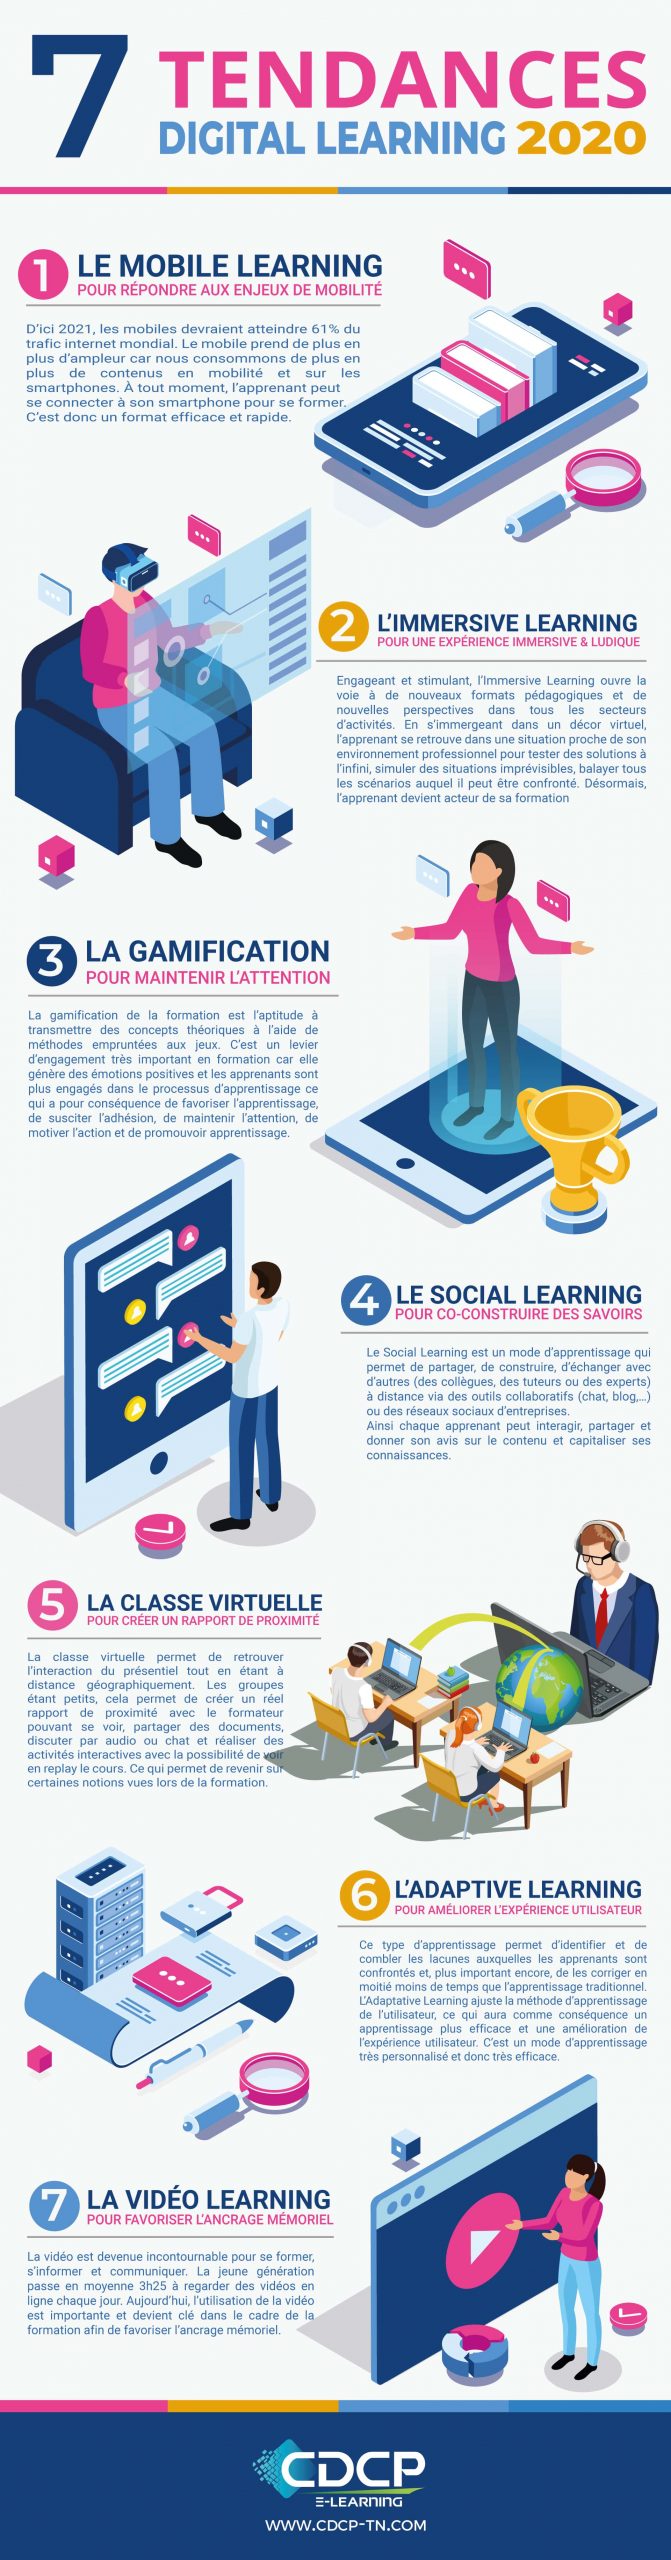 Tendances Digital Learning 2020 by CDCP min scaled